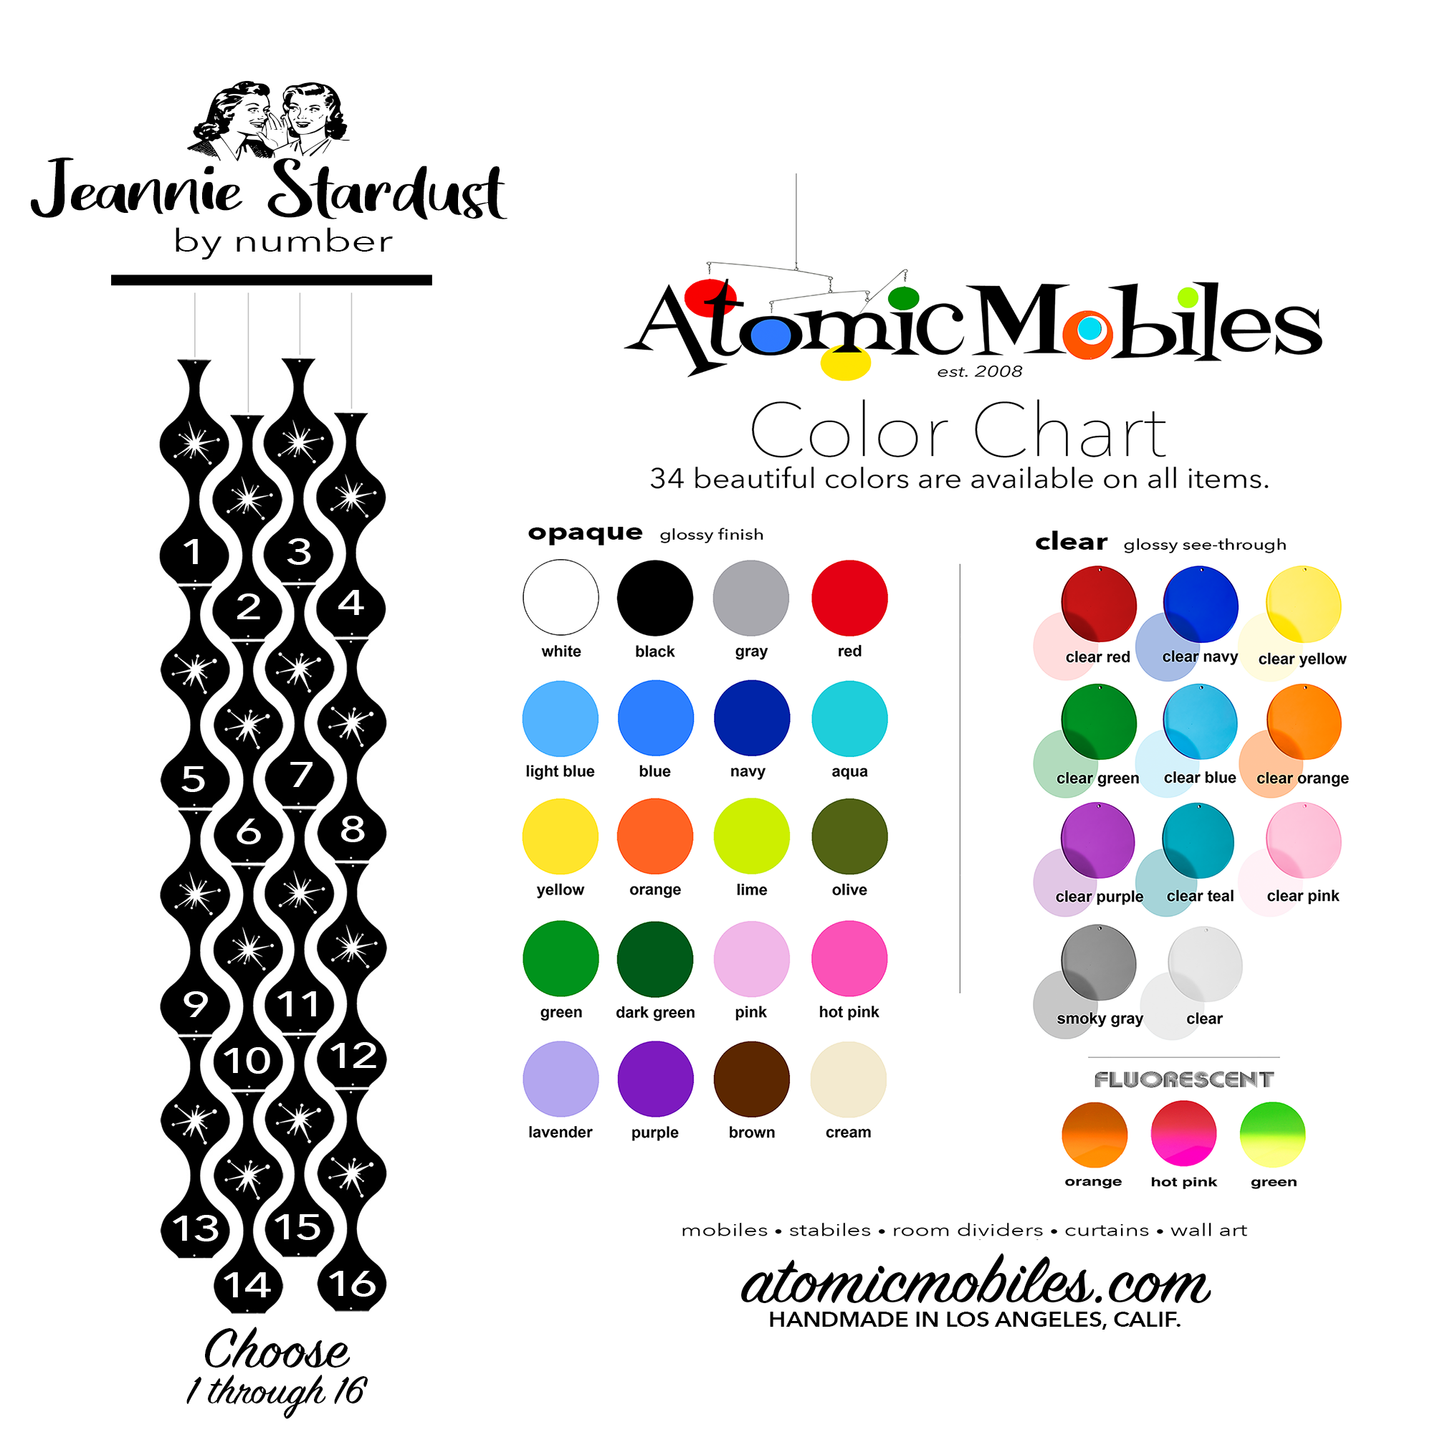 Jeannie Stardust Mid Century Modern retro room divider panels DIY Kit Color Chart for custom colors - by AtomicMobiles.com